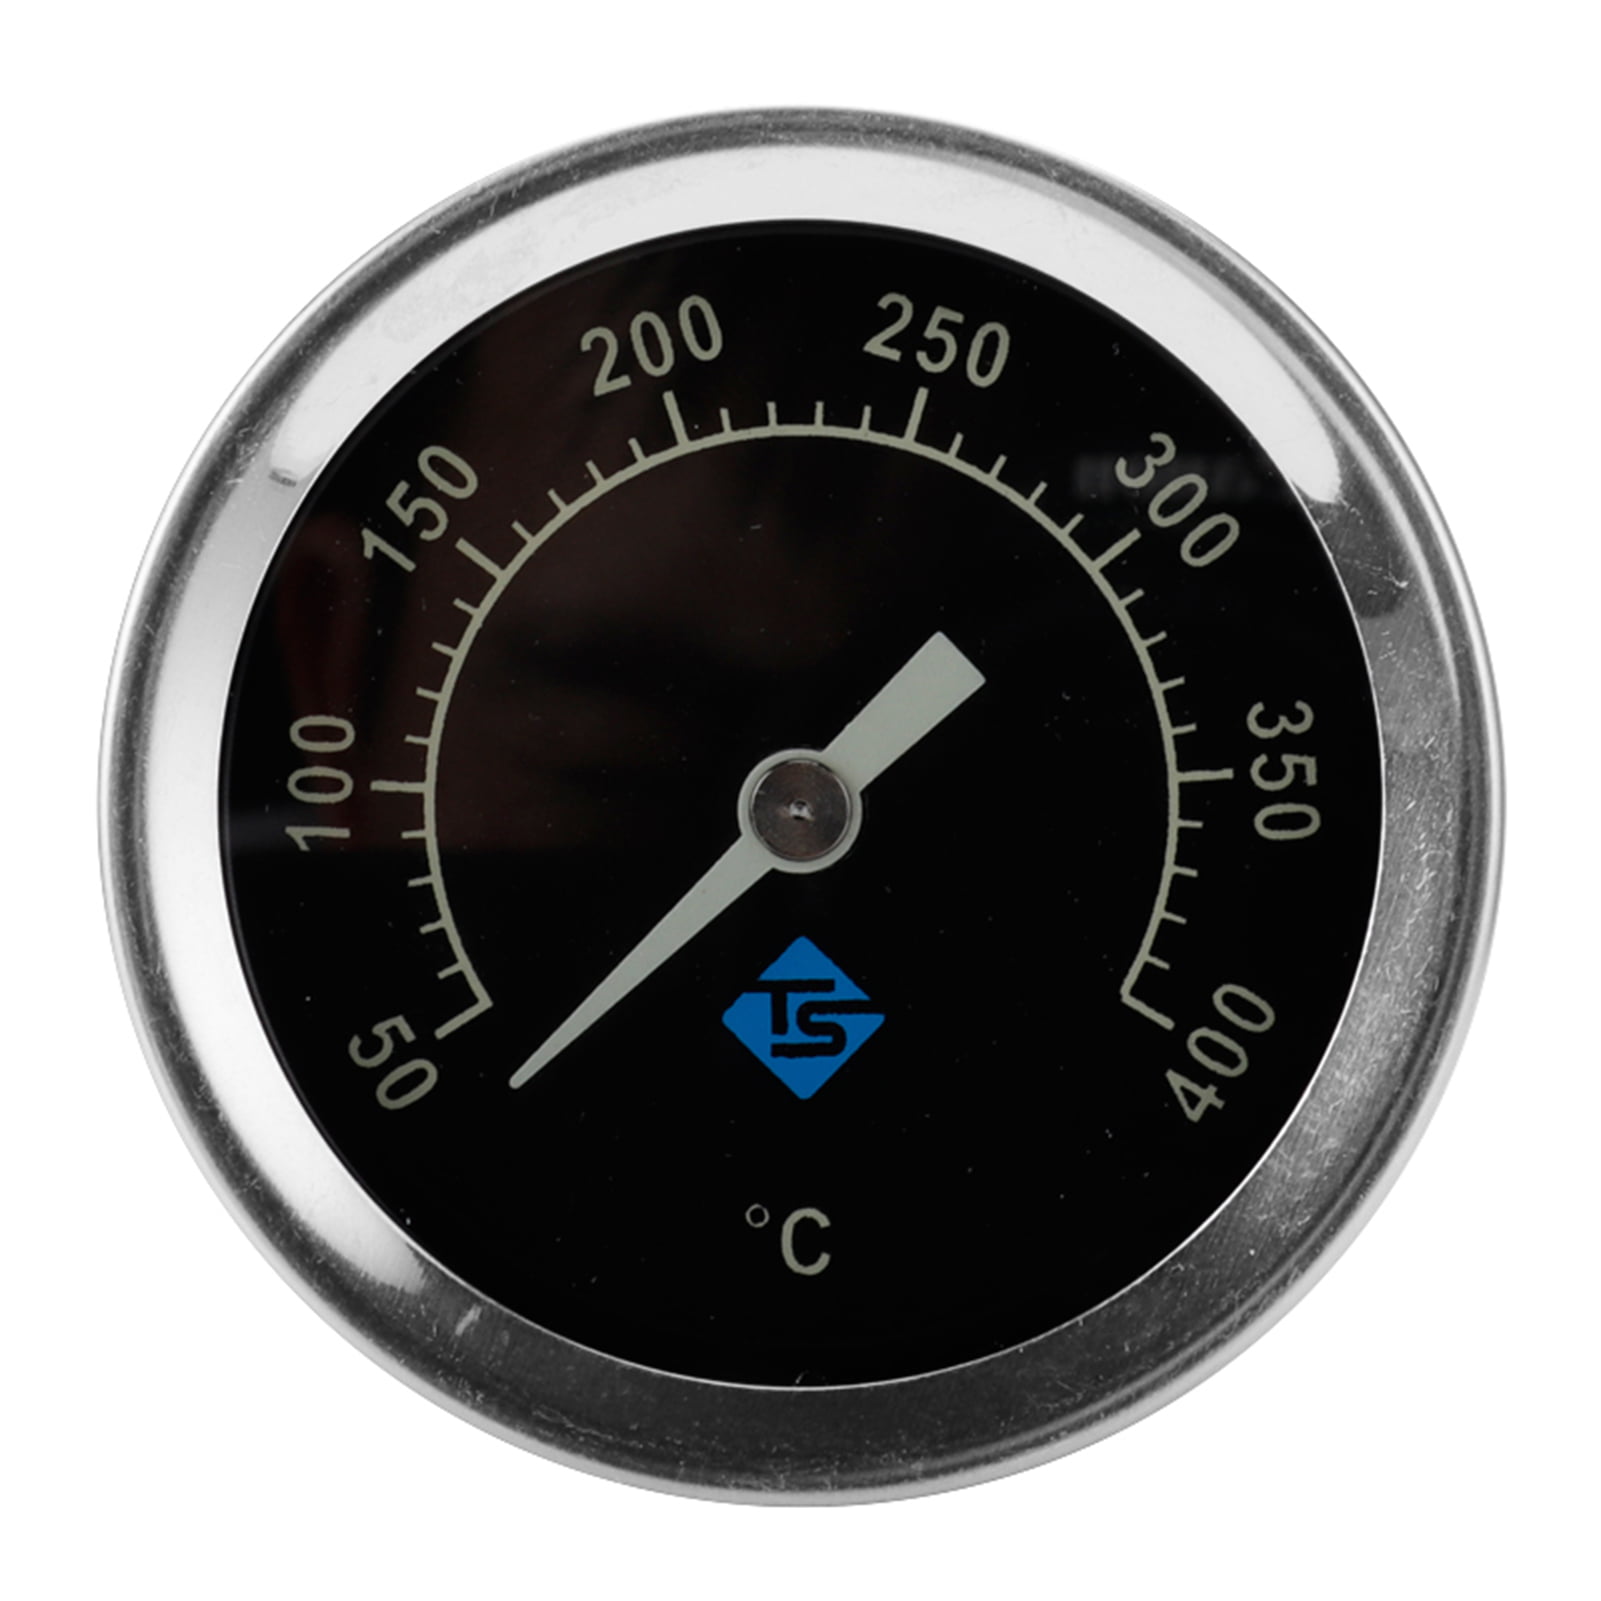 50-400℃ Barbecue BBQ Smoker Grill Stainless Steel Thermometer Temperature Gauge 